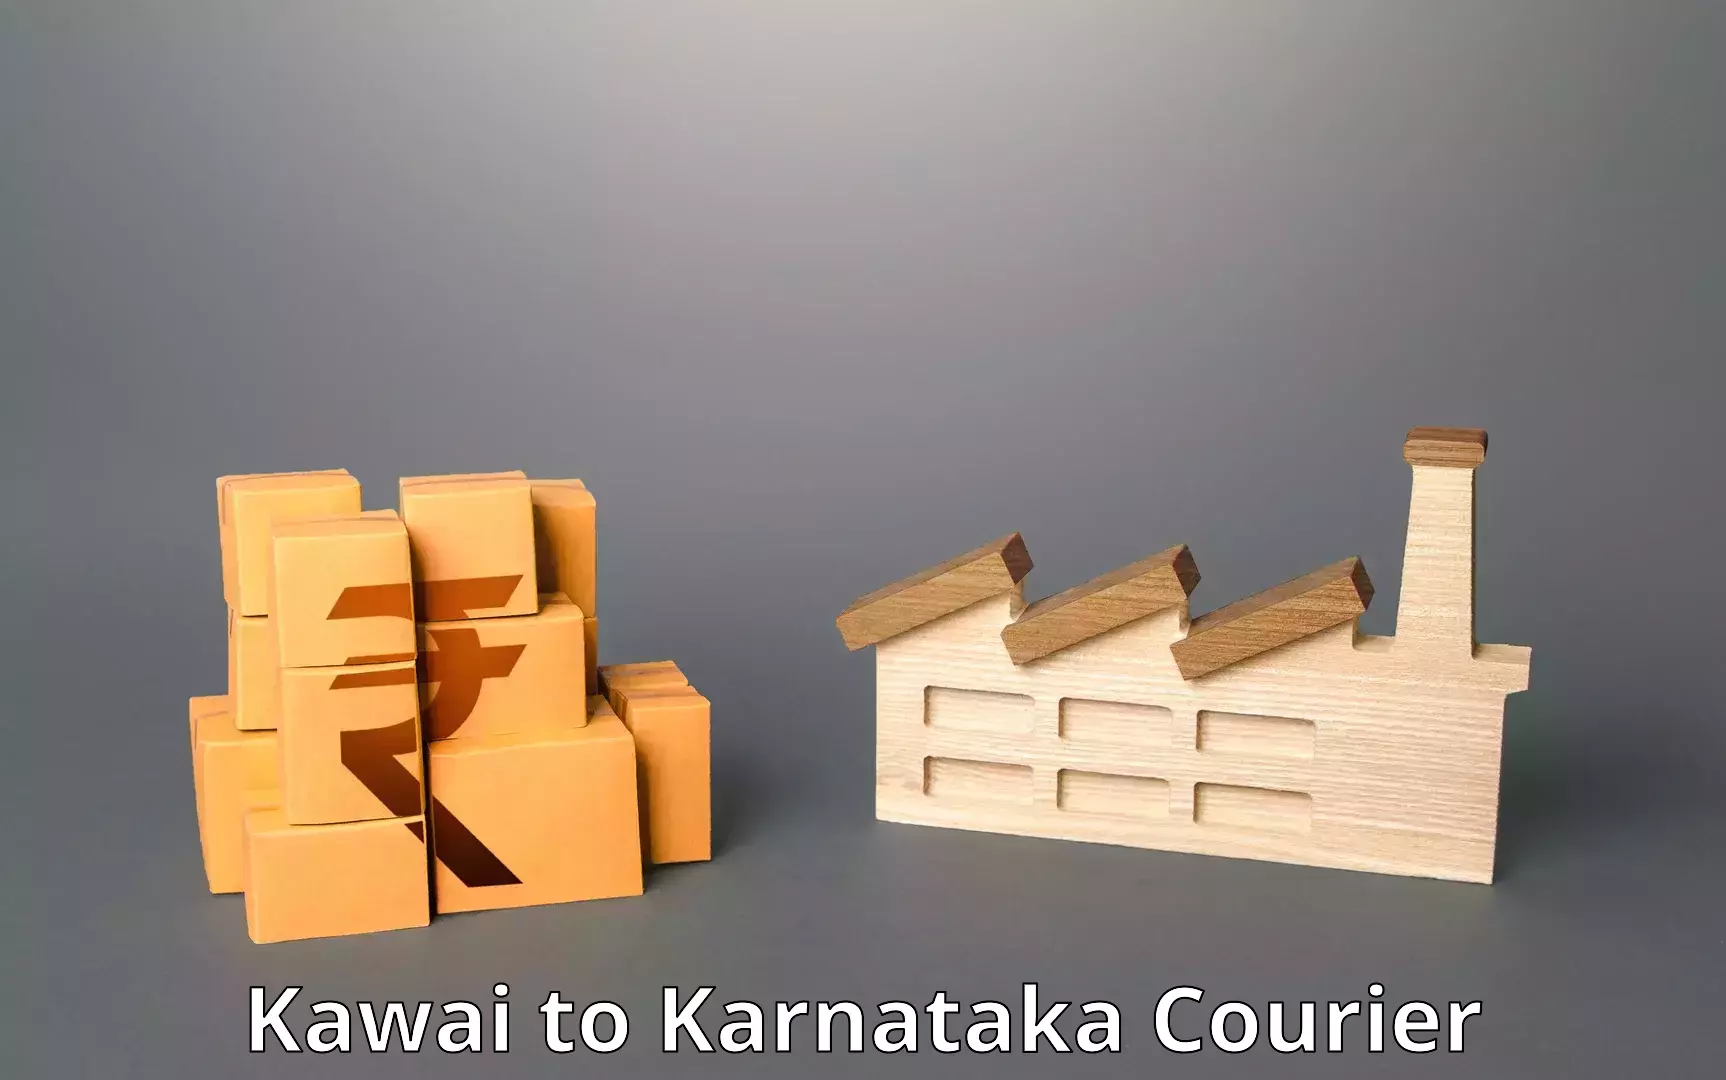 Subscription-based courier Kawai to Bangalore